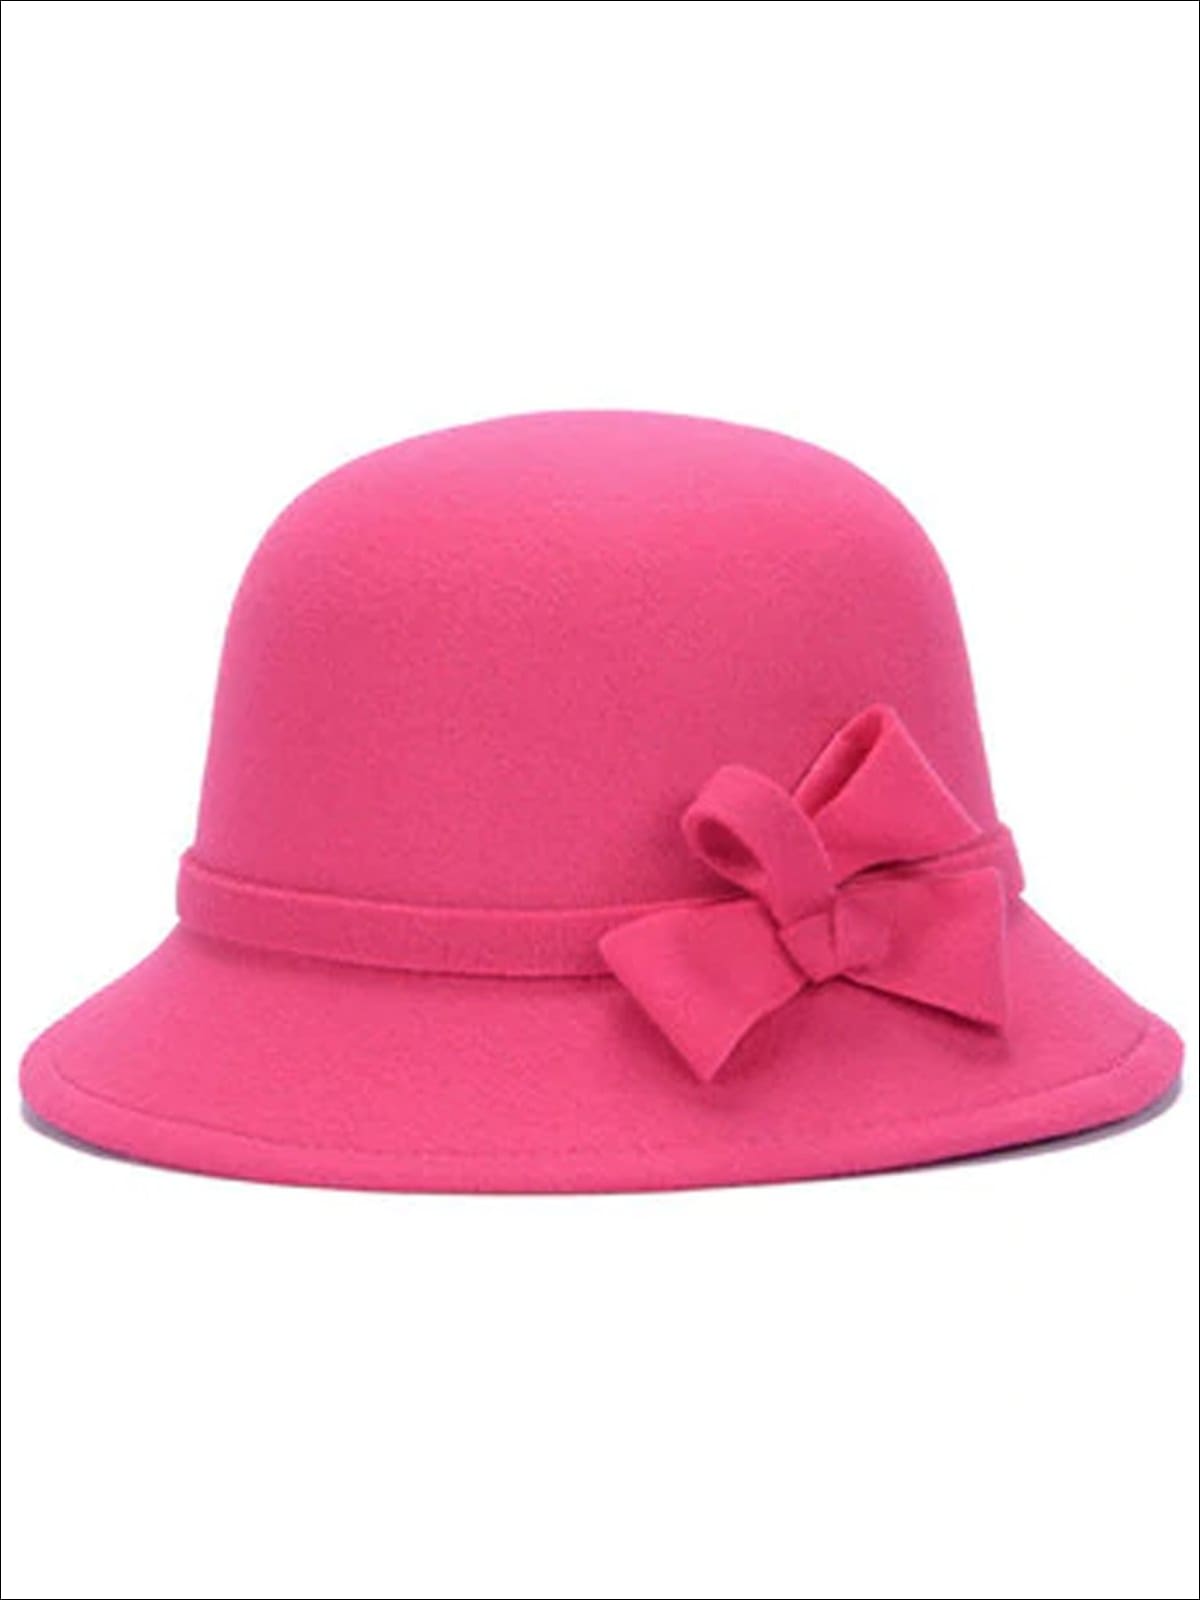 Womens Trendy Bow Tie Bowler Hat - Hot Pink - Womens Hats